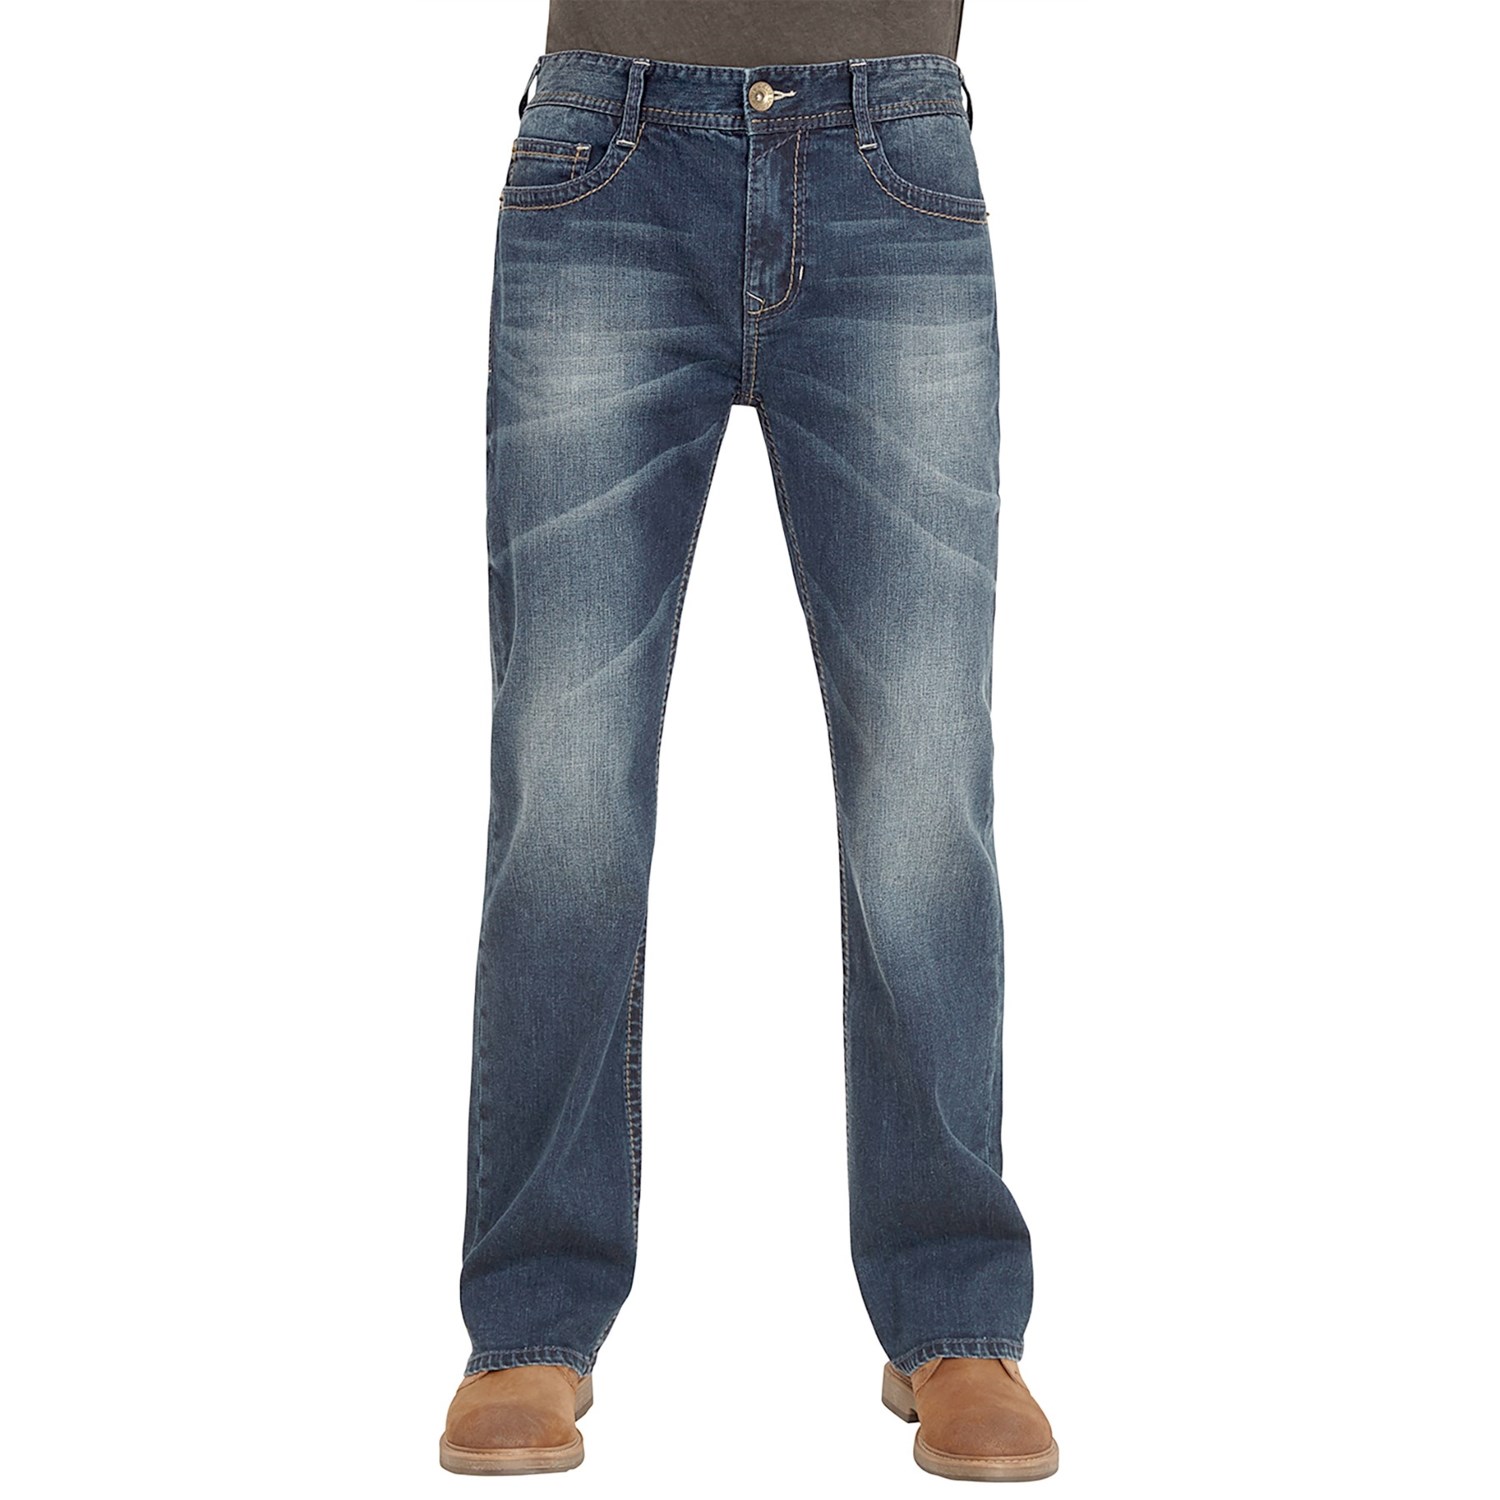 Seven7 Luxury Stretch Jeans (For Men) - Save 81%